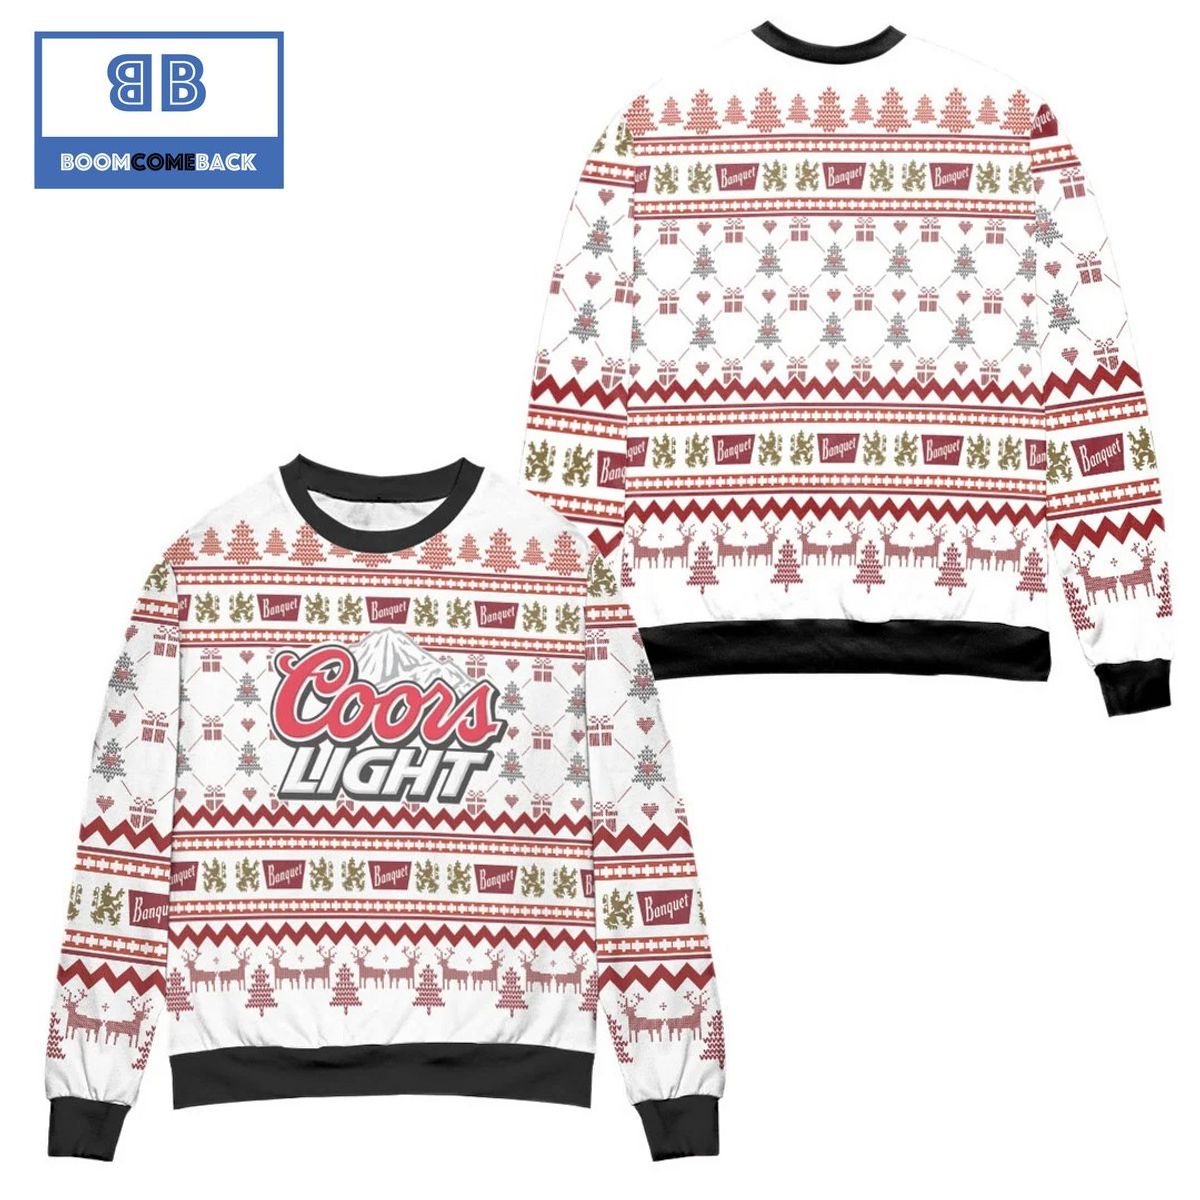 Coors Light Beer Gift And Pine Tree Pattern Christmas 3D Sweater